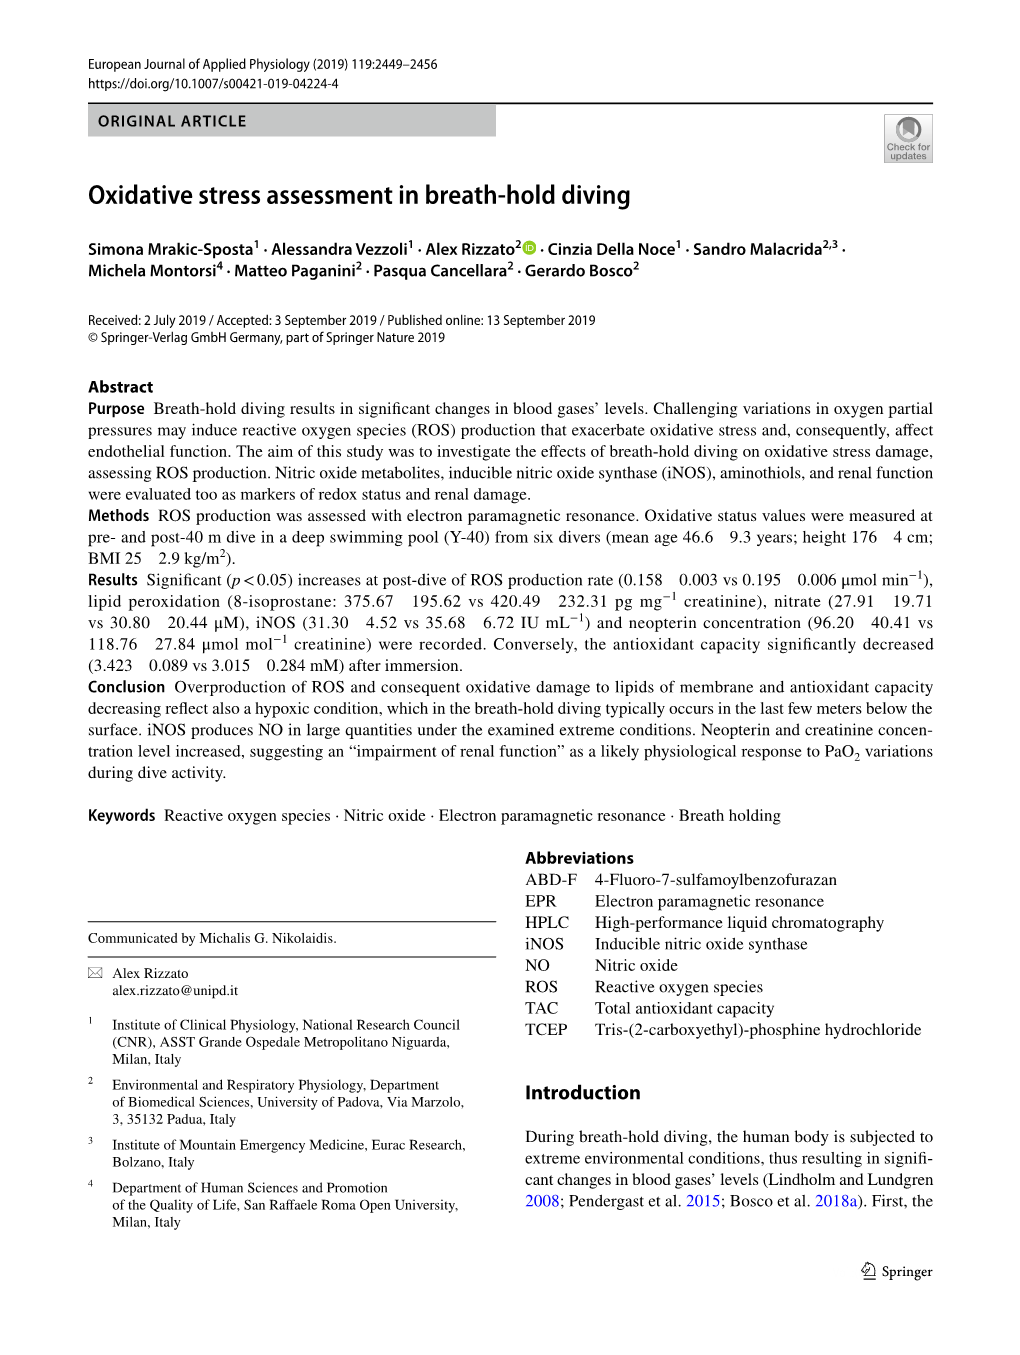 Oxidative Stress Assessment in Breath-Hold Diving